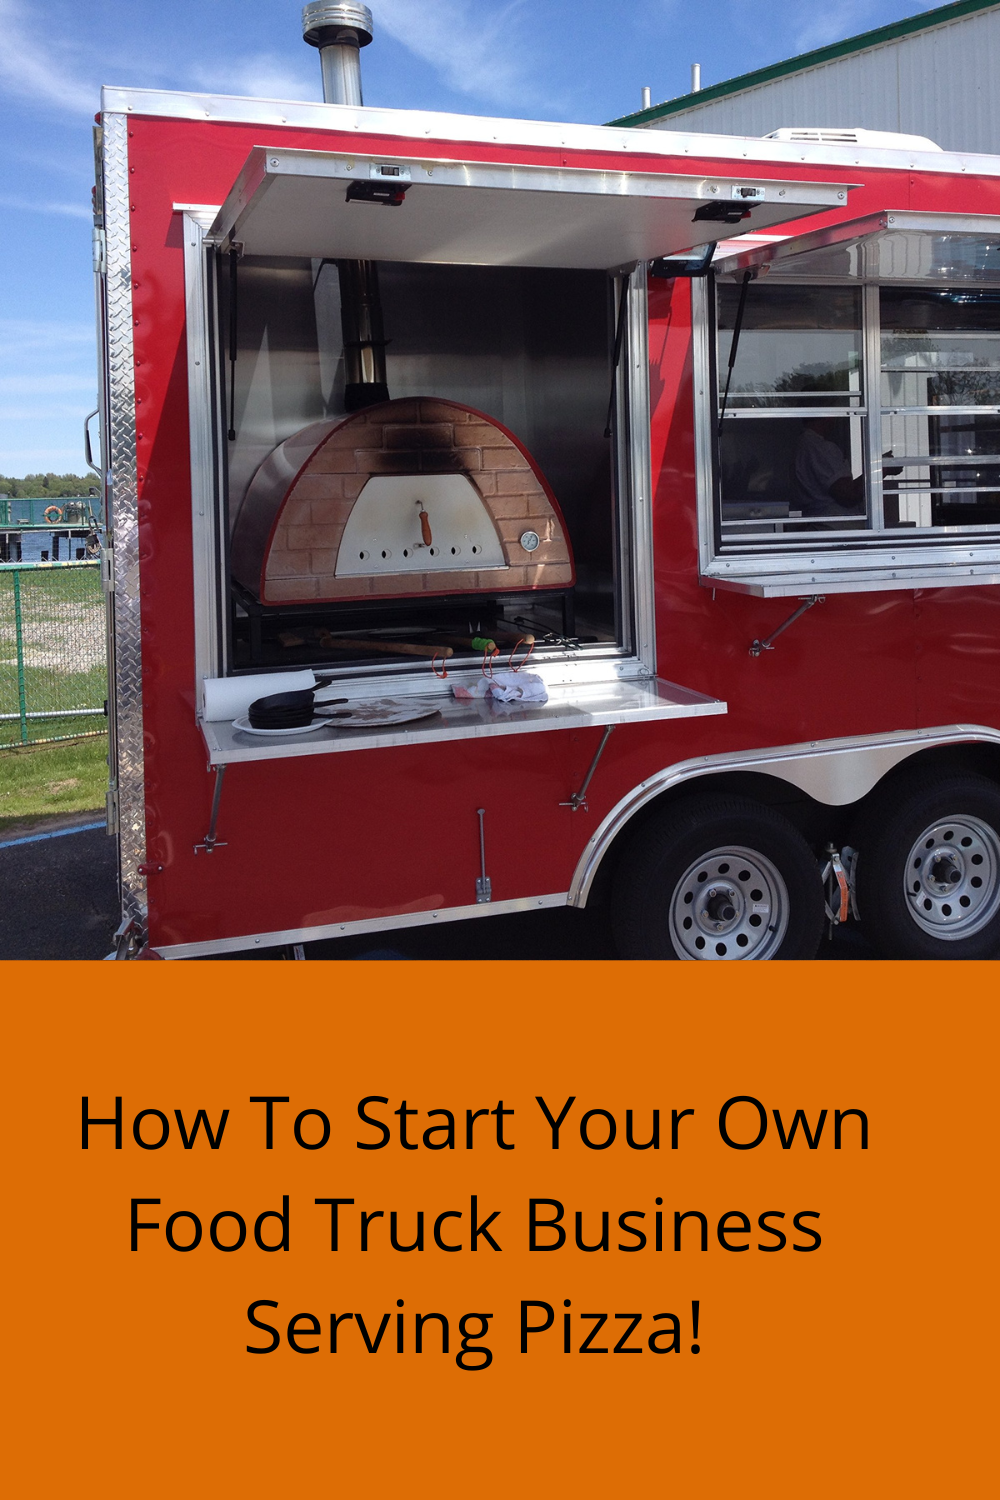 How To Start Your Own Food Truck Business Serving Pizza!